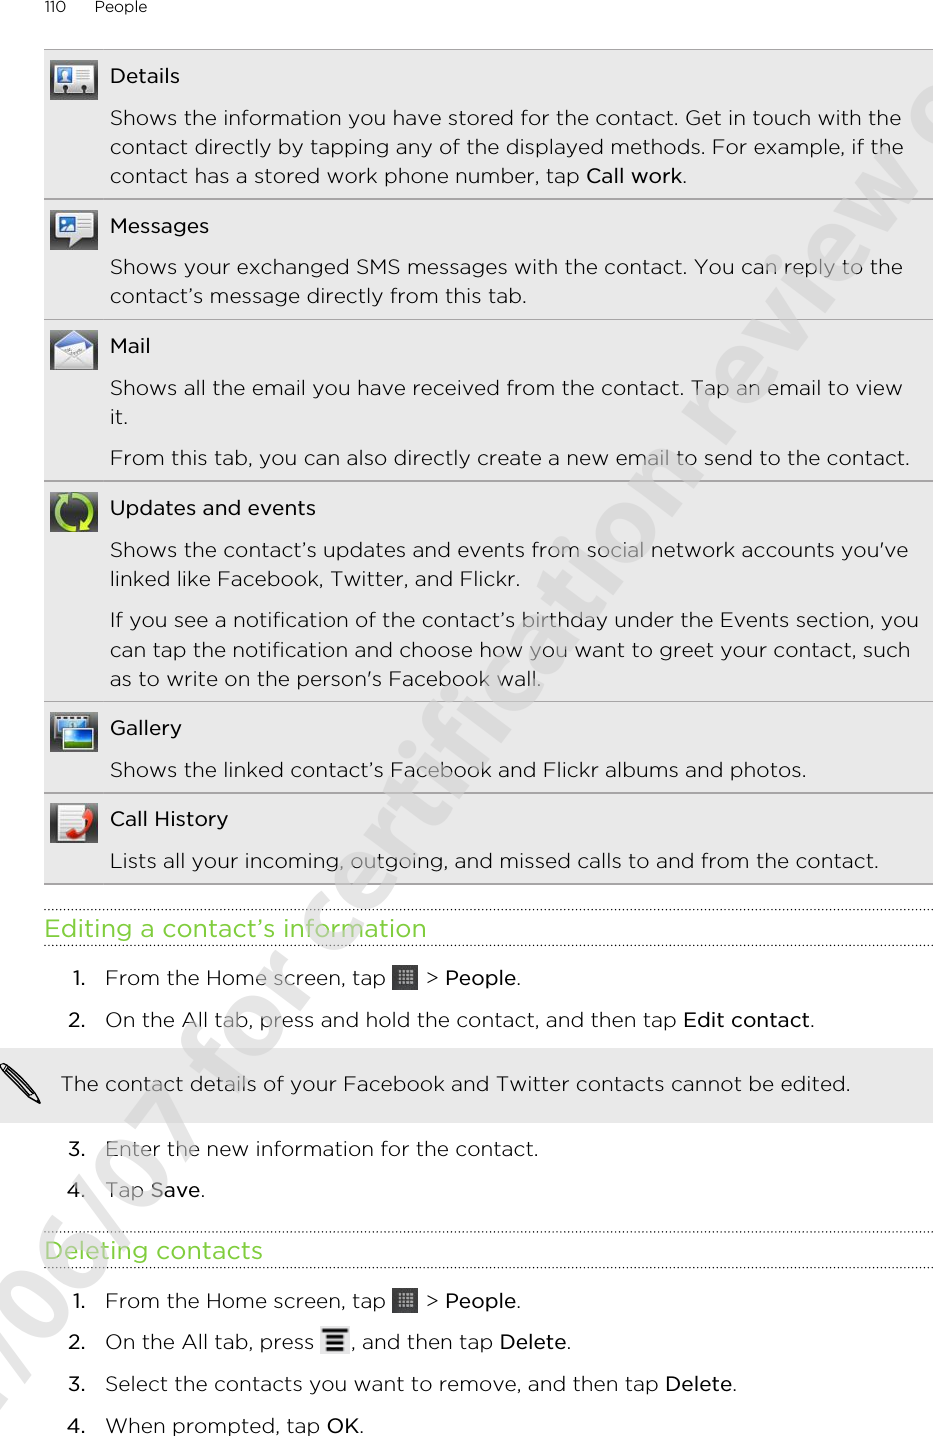 DetailsShows the information you have stored for the contact. Get in touch with thecontact directly by tapping any of the displayed methods. For example, if thecontact has a stored work phone number, tap Call work.MessagesShows your exchanged SMS messages with the contact. You can reply to thecontact’s message directly from this tab.MailShows all the email you have received from the contact. Tap an email to viewit.From this tab, you can also directly create a new email to send to the contact.Updates and eventsShows the contact’s updates and events from social network accounts you&apos;velinked like Facebook, Twitter, and Flickr.If you see a notification of the contact’s birthday under the Events section, youcan tap the notification and choose how you want to greet your contact, suchas to write on the person&apos;s Facebook wall.GalleryShows the linked contact’s Facebook and Flickr albums and photos.Call HistoryLists all your incoming, outgoing, and missed calls to and from the contact.Editing a contact’s information1. From the Home screen, tap   &gt; People.2. On the All tab, press and hold the contact, and then tap Edit contact. The contact details of your Facebook and Twitter contacts cannot be edited.3. Enter the new information for the contact.4. Tap Save.Deleting contacts1. From the Home screen, tap   &gt; People.2. On the All tab, press  , and then tap Delete.3. Select the contacts you want to remove, and then tap Delete.4. When prompted, tap OK.110 People2011/06/07 for certification review only